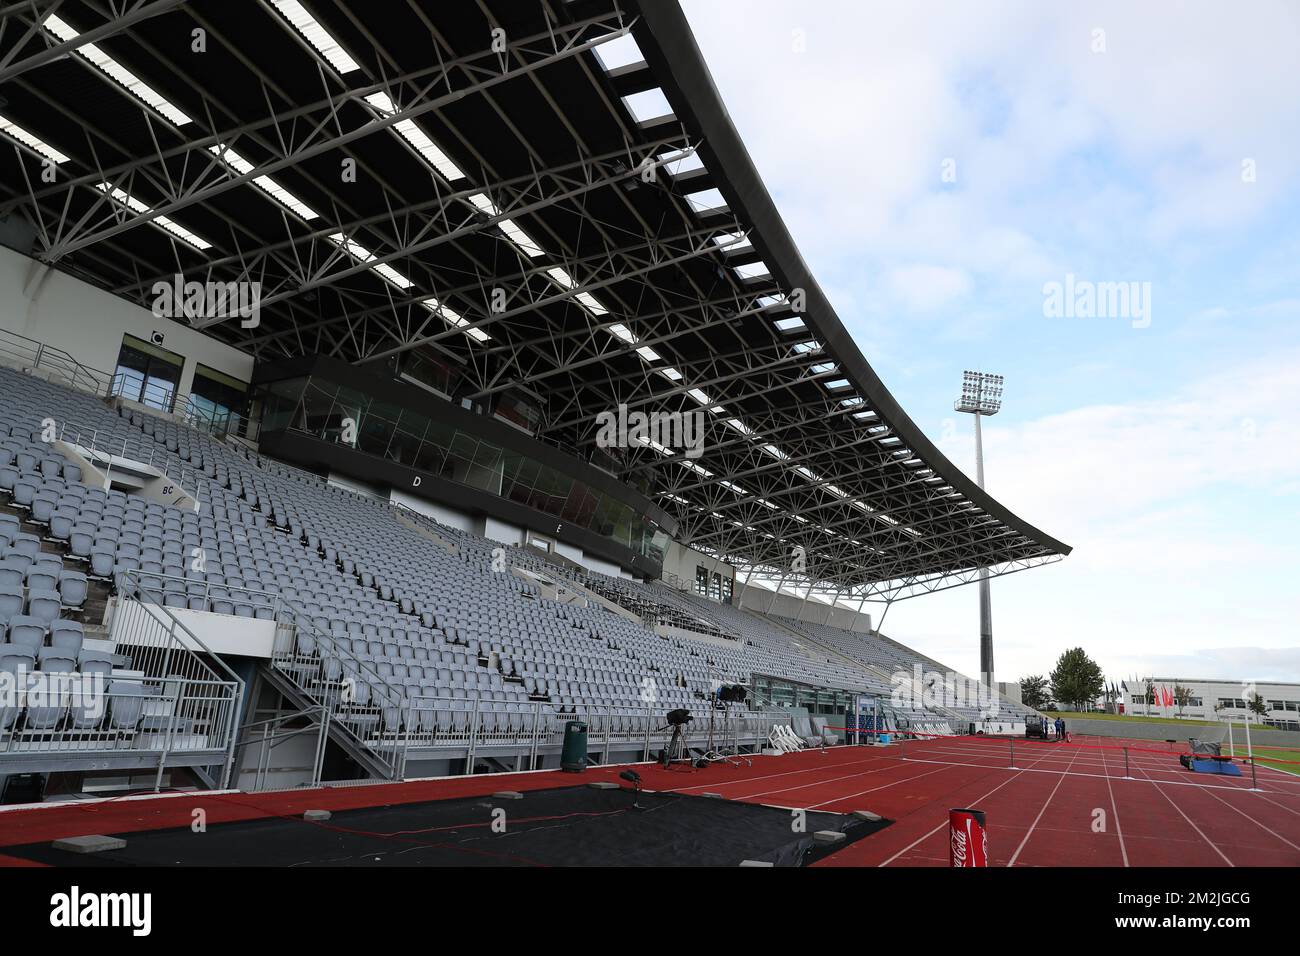 The Laugardalsvollur stadium pictured before a training session of Belgian national team the Red Devils in Reykjavik, Iceland, Monday 10 September 2018. Belgium plays on Tuesday their first game in the Nations League against Iceland. BELGA PHOTO BRUNO FAHY  Stock Photo